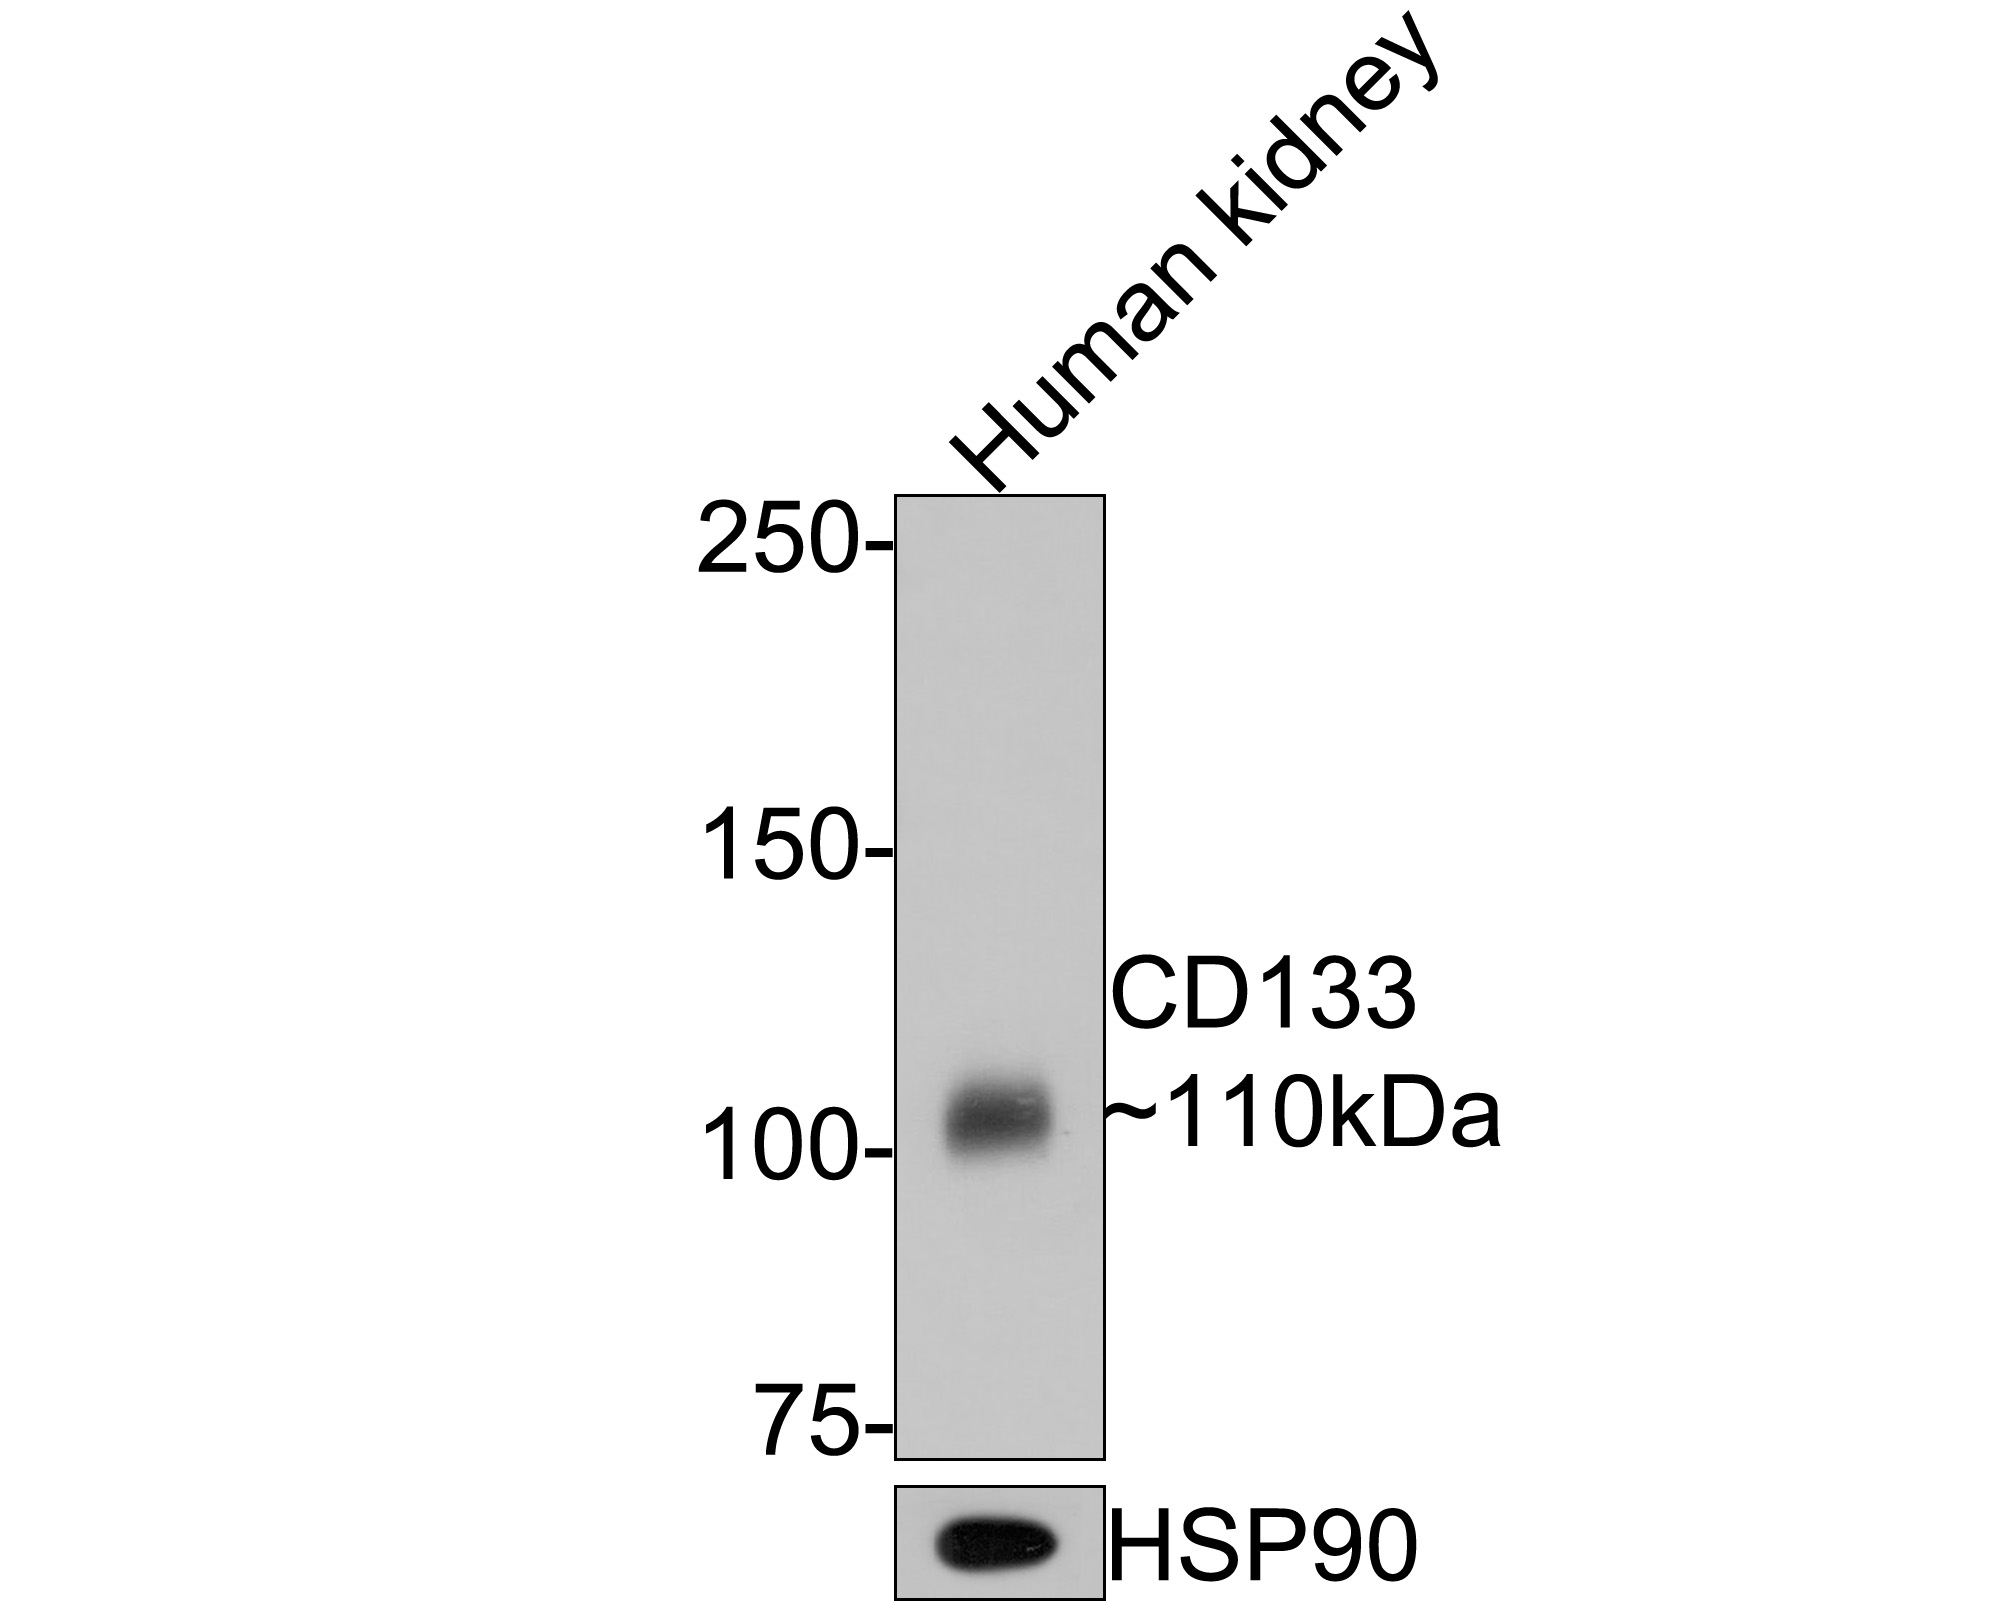 Western blot analysis of CD133 on human kidney tissue lysates with Mouse anti-CD133 antibody (HA601024) at 1/500 dilution.<br />
<br />
Lysates/proteins at 20 µg/Lane.<br />
<br />
Predicted band size: 97 kDa<br />
Observed band size: 110 kDa<br />
<br />
Exposure time: 30 seconds;<br />
<br />
6% SDS-PAGE gel.<br />
<br />
Proteins were transferred to a PVDF membrane and blocked with 5% NFDM/TBST for 1 hour at room temperature. The primary antibody (HA601024) at 1/500 dilution was used in 5% NFDM/TBST at room temperature for 2 hours. Goat Anti-Mouse IgG - HRP Secondary Antibody (HA1006) at 1:100,000 dilution was used for 1 hour at room temperature.